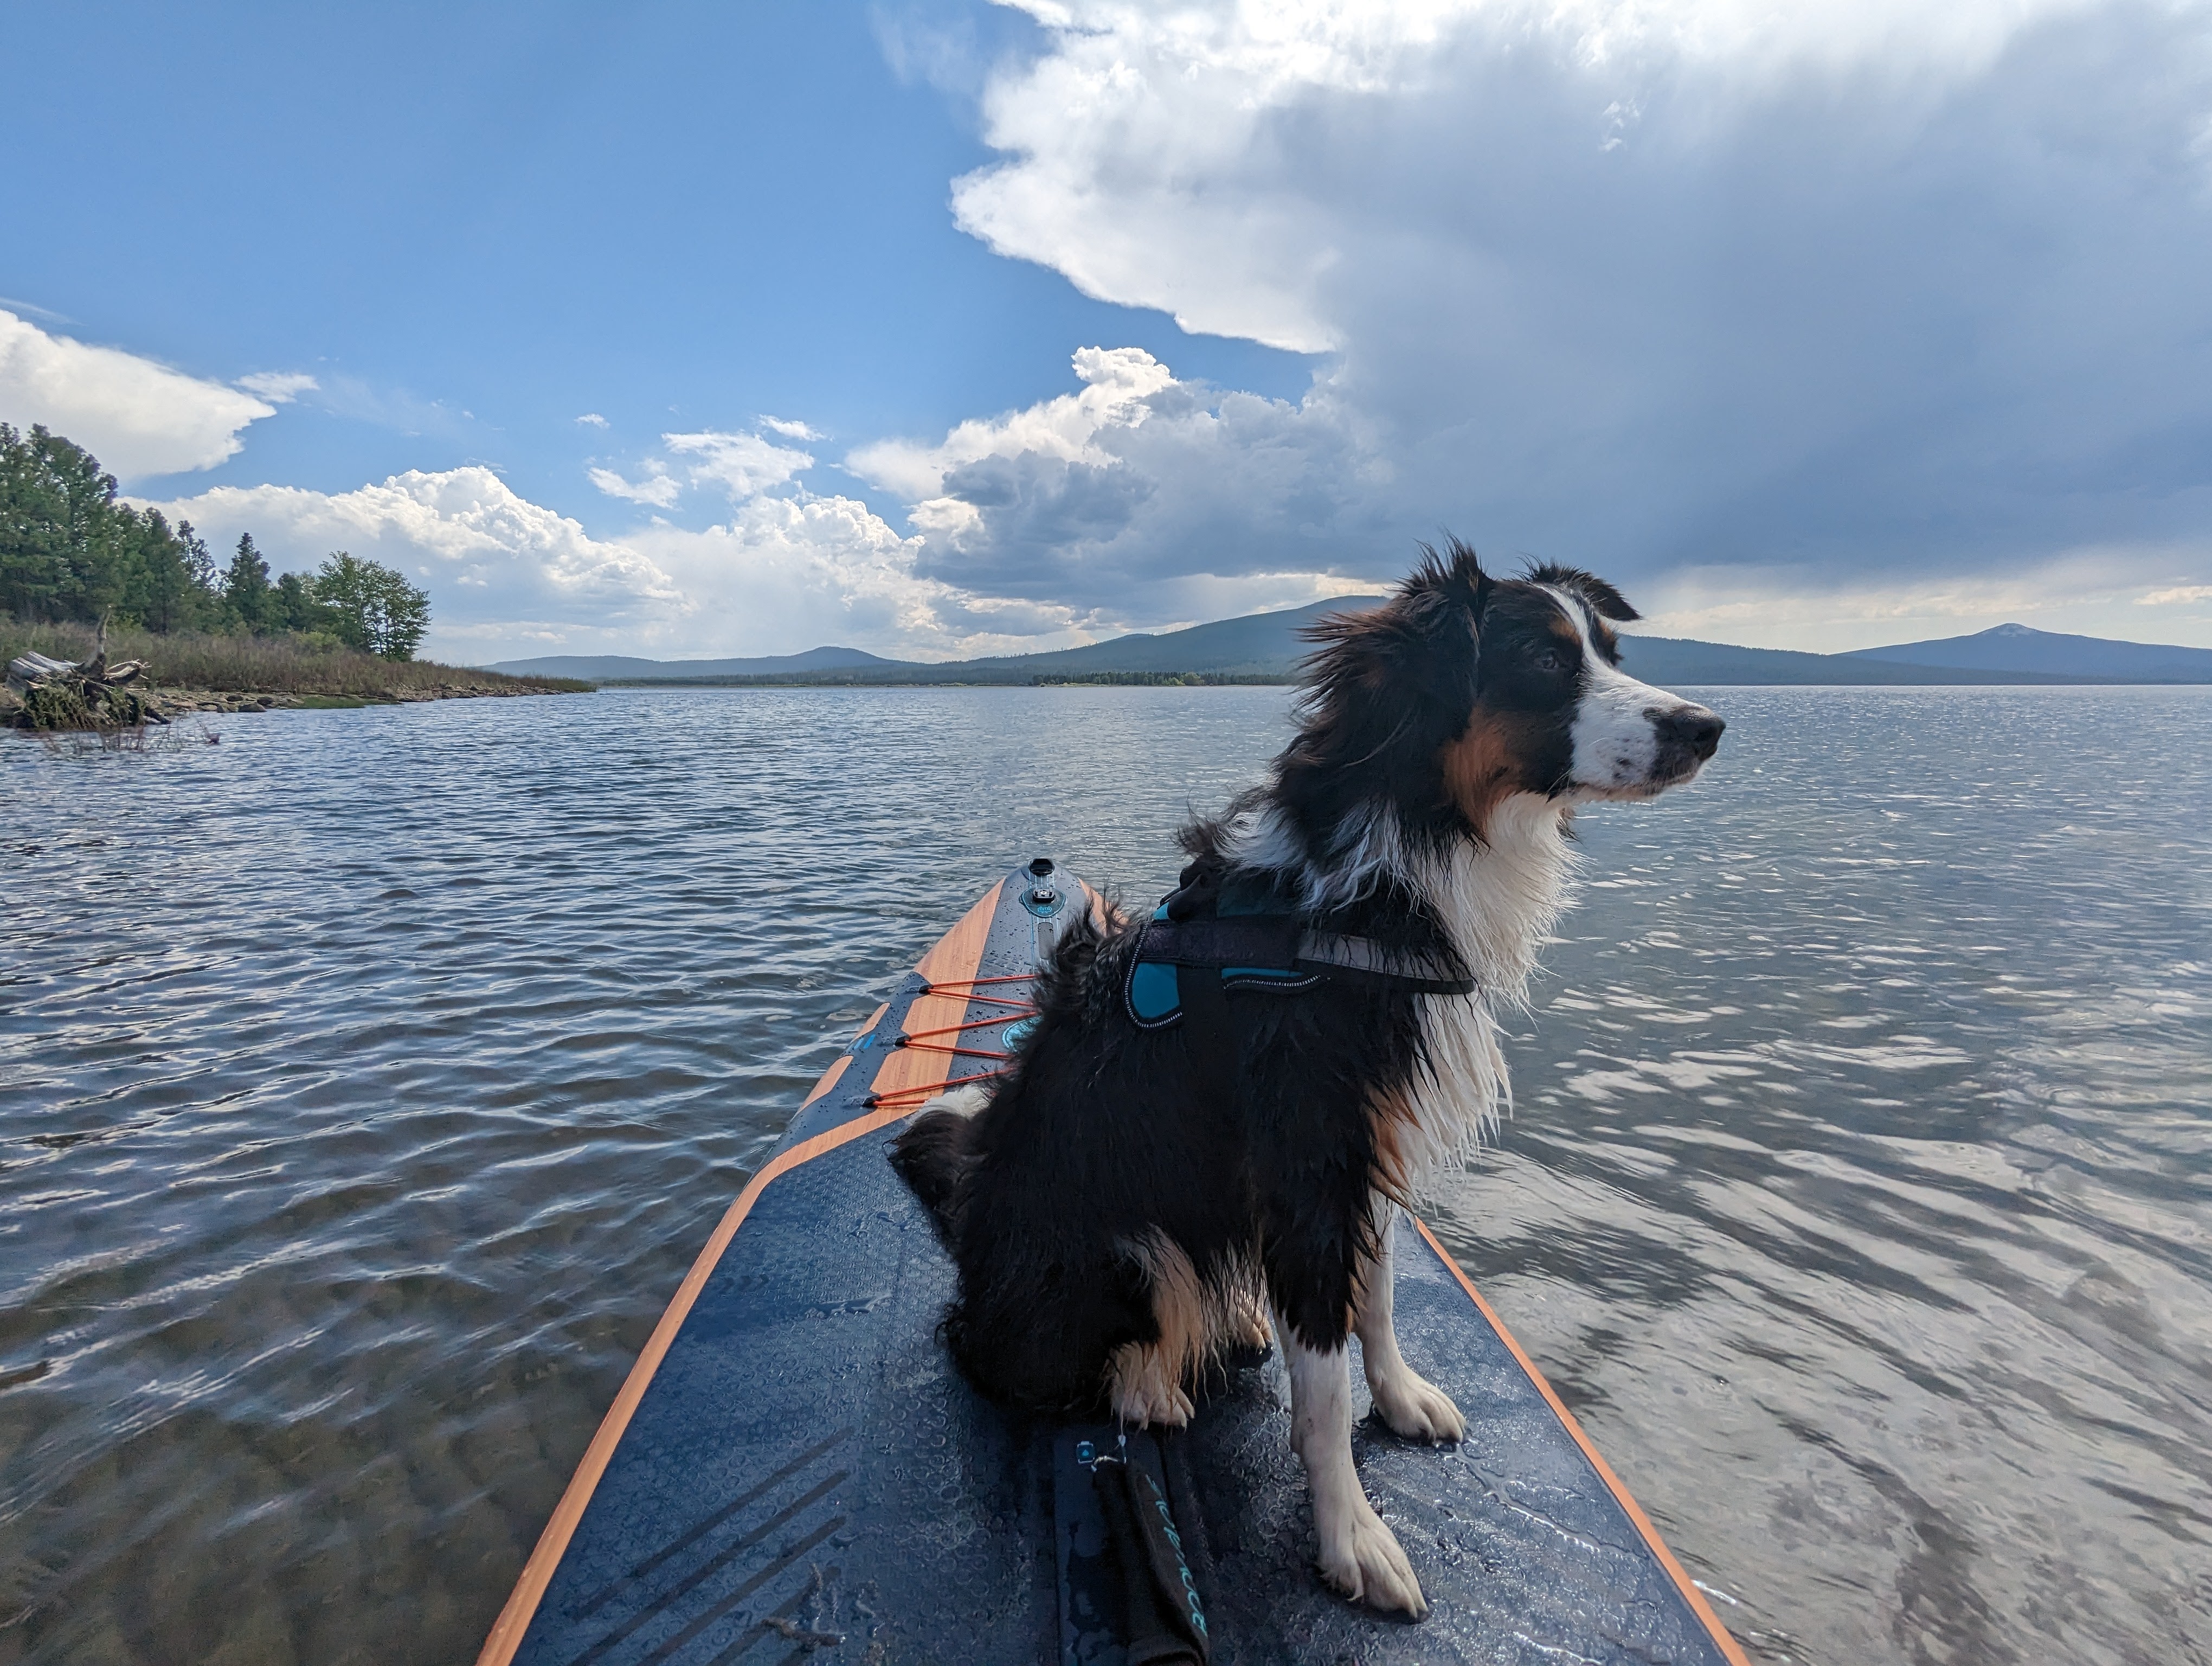 A dog sits on a paddleboard in the middle of a calm lake, with a scenic landscape of mountains and a partly cloudy sky in the background.